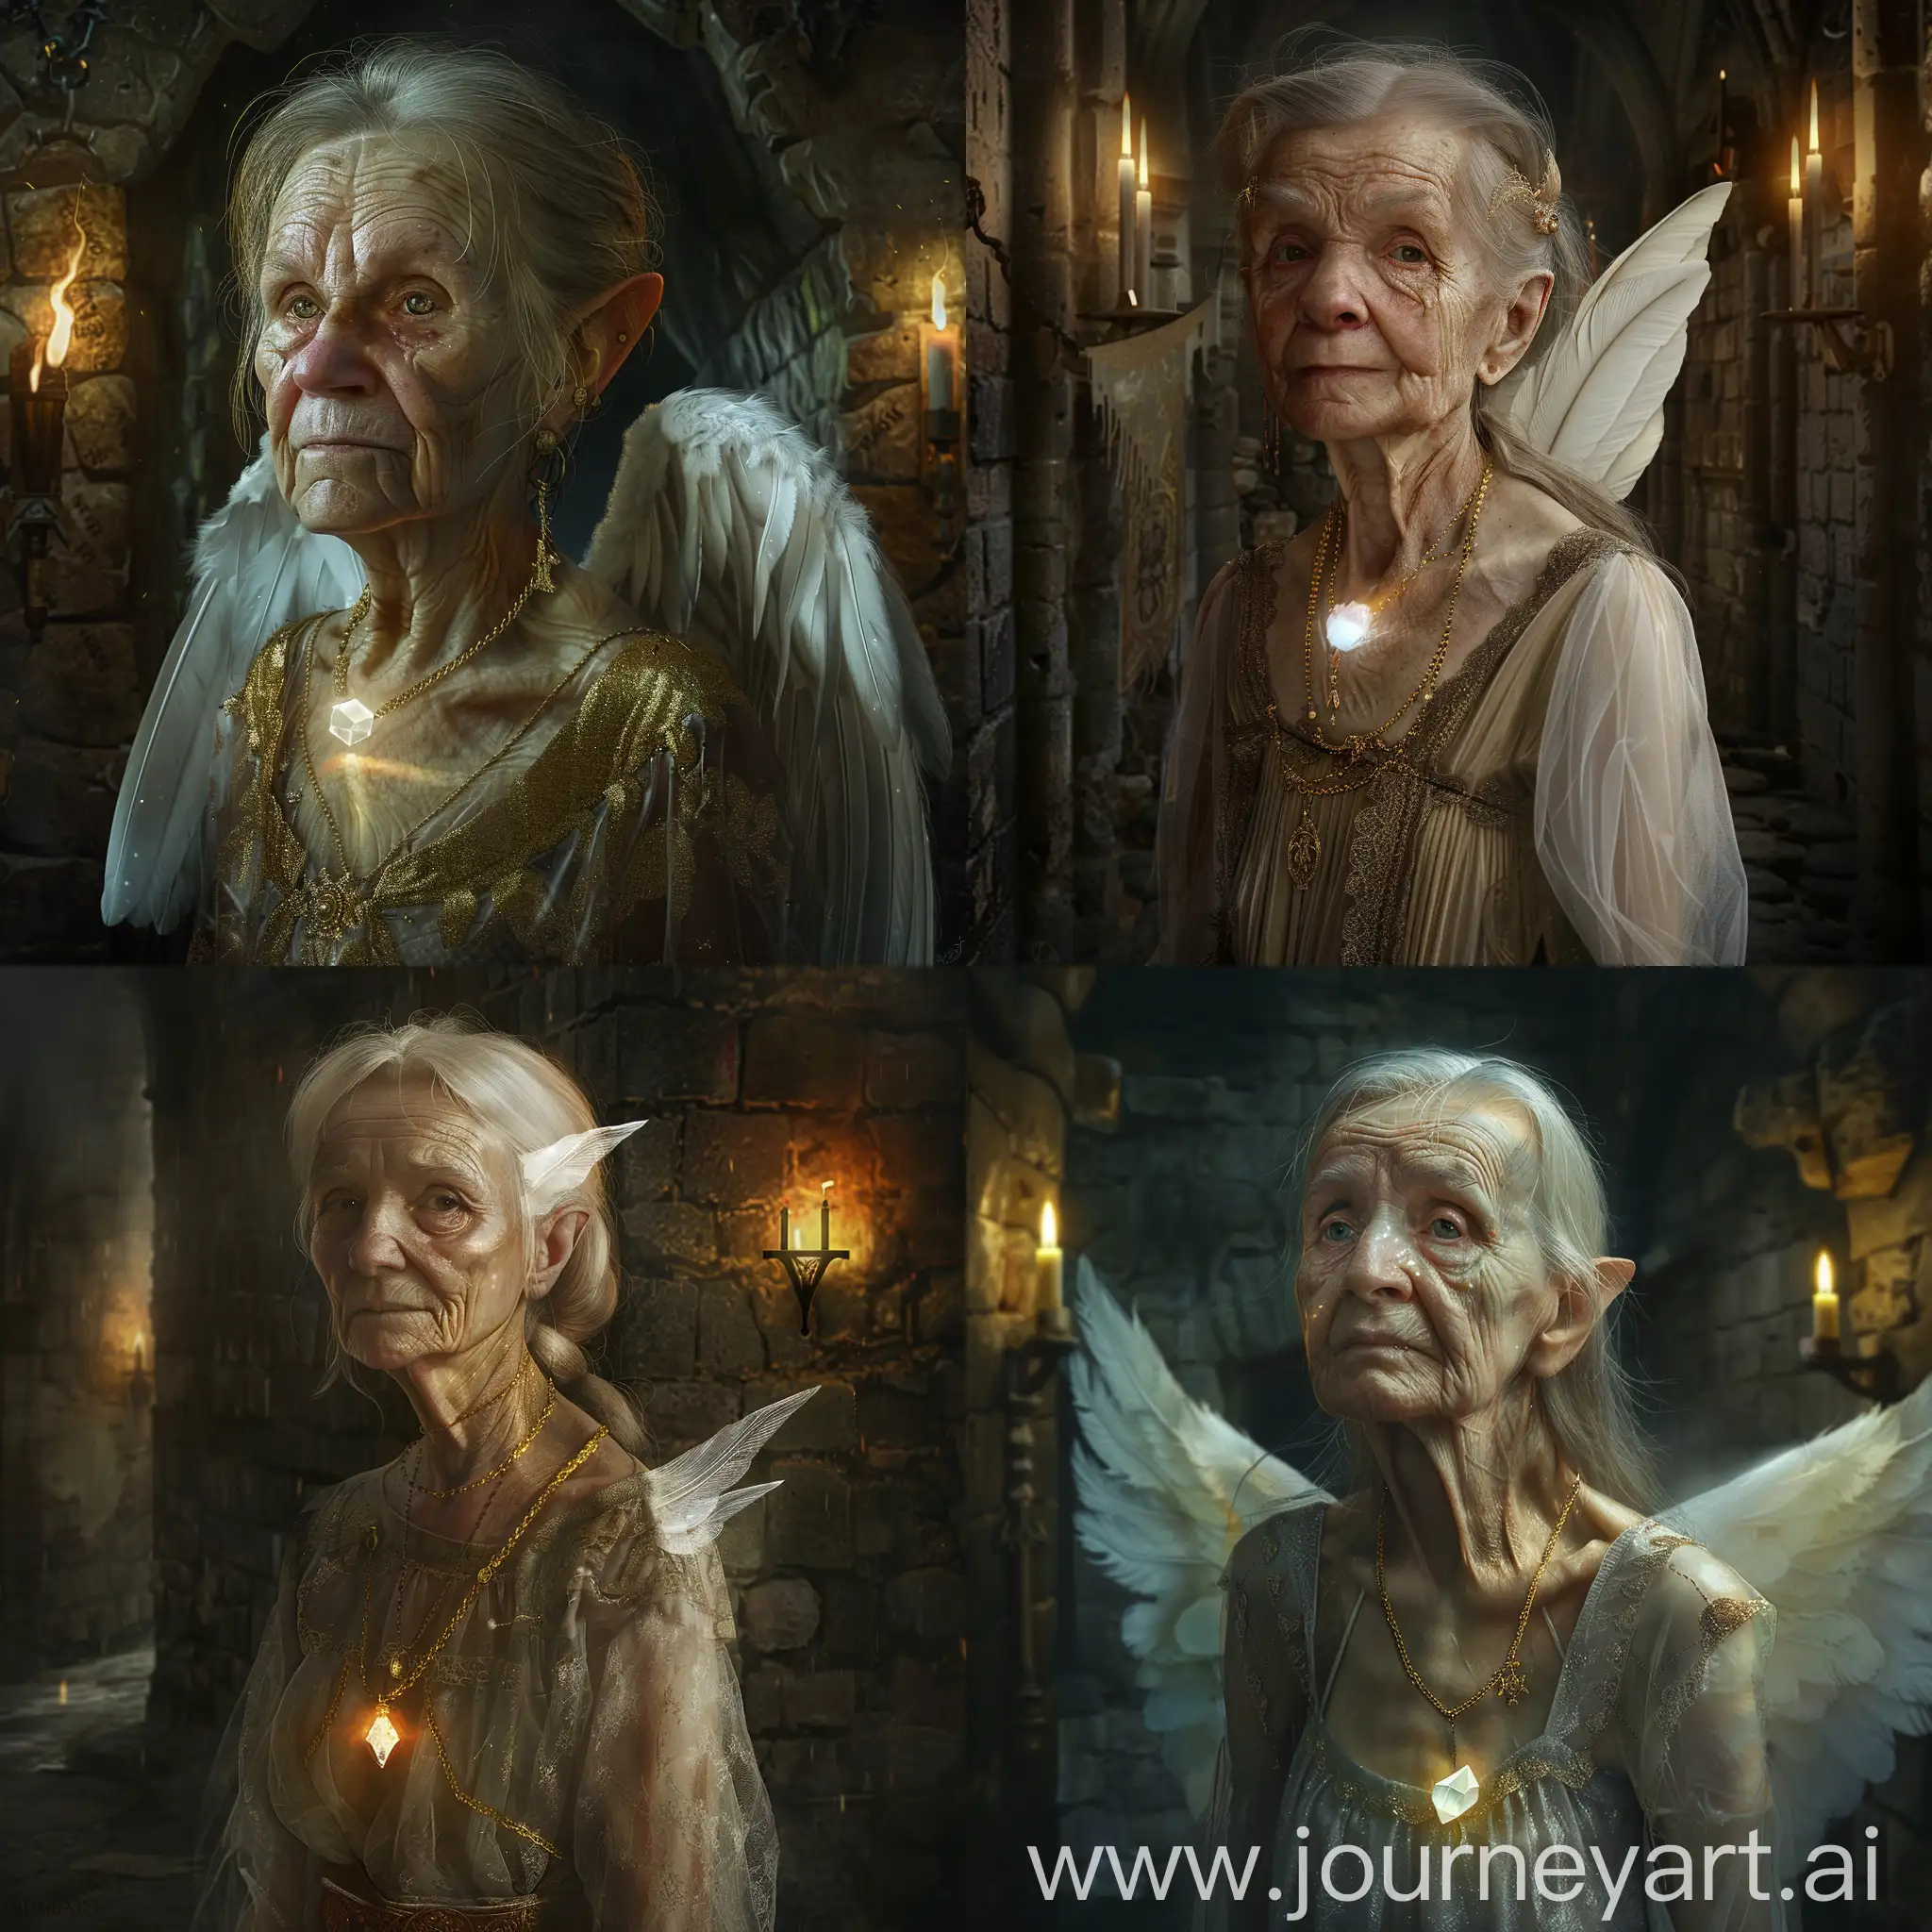 Mystical-Portrait-of-a-Mature-Slavic-Woman-with-Crystal-Necklace-and-Angelic-Wings-in-Dark-Fantasy-Castle-Setting